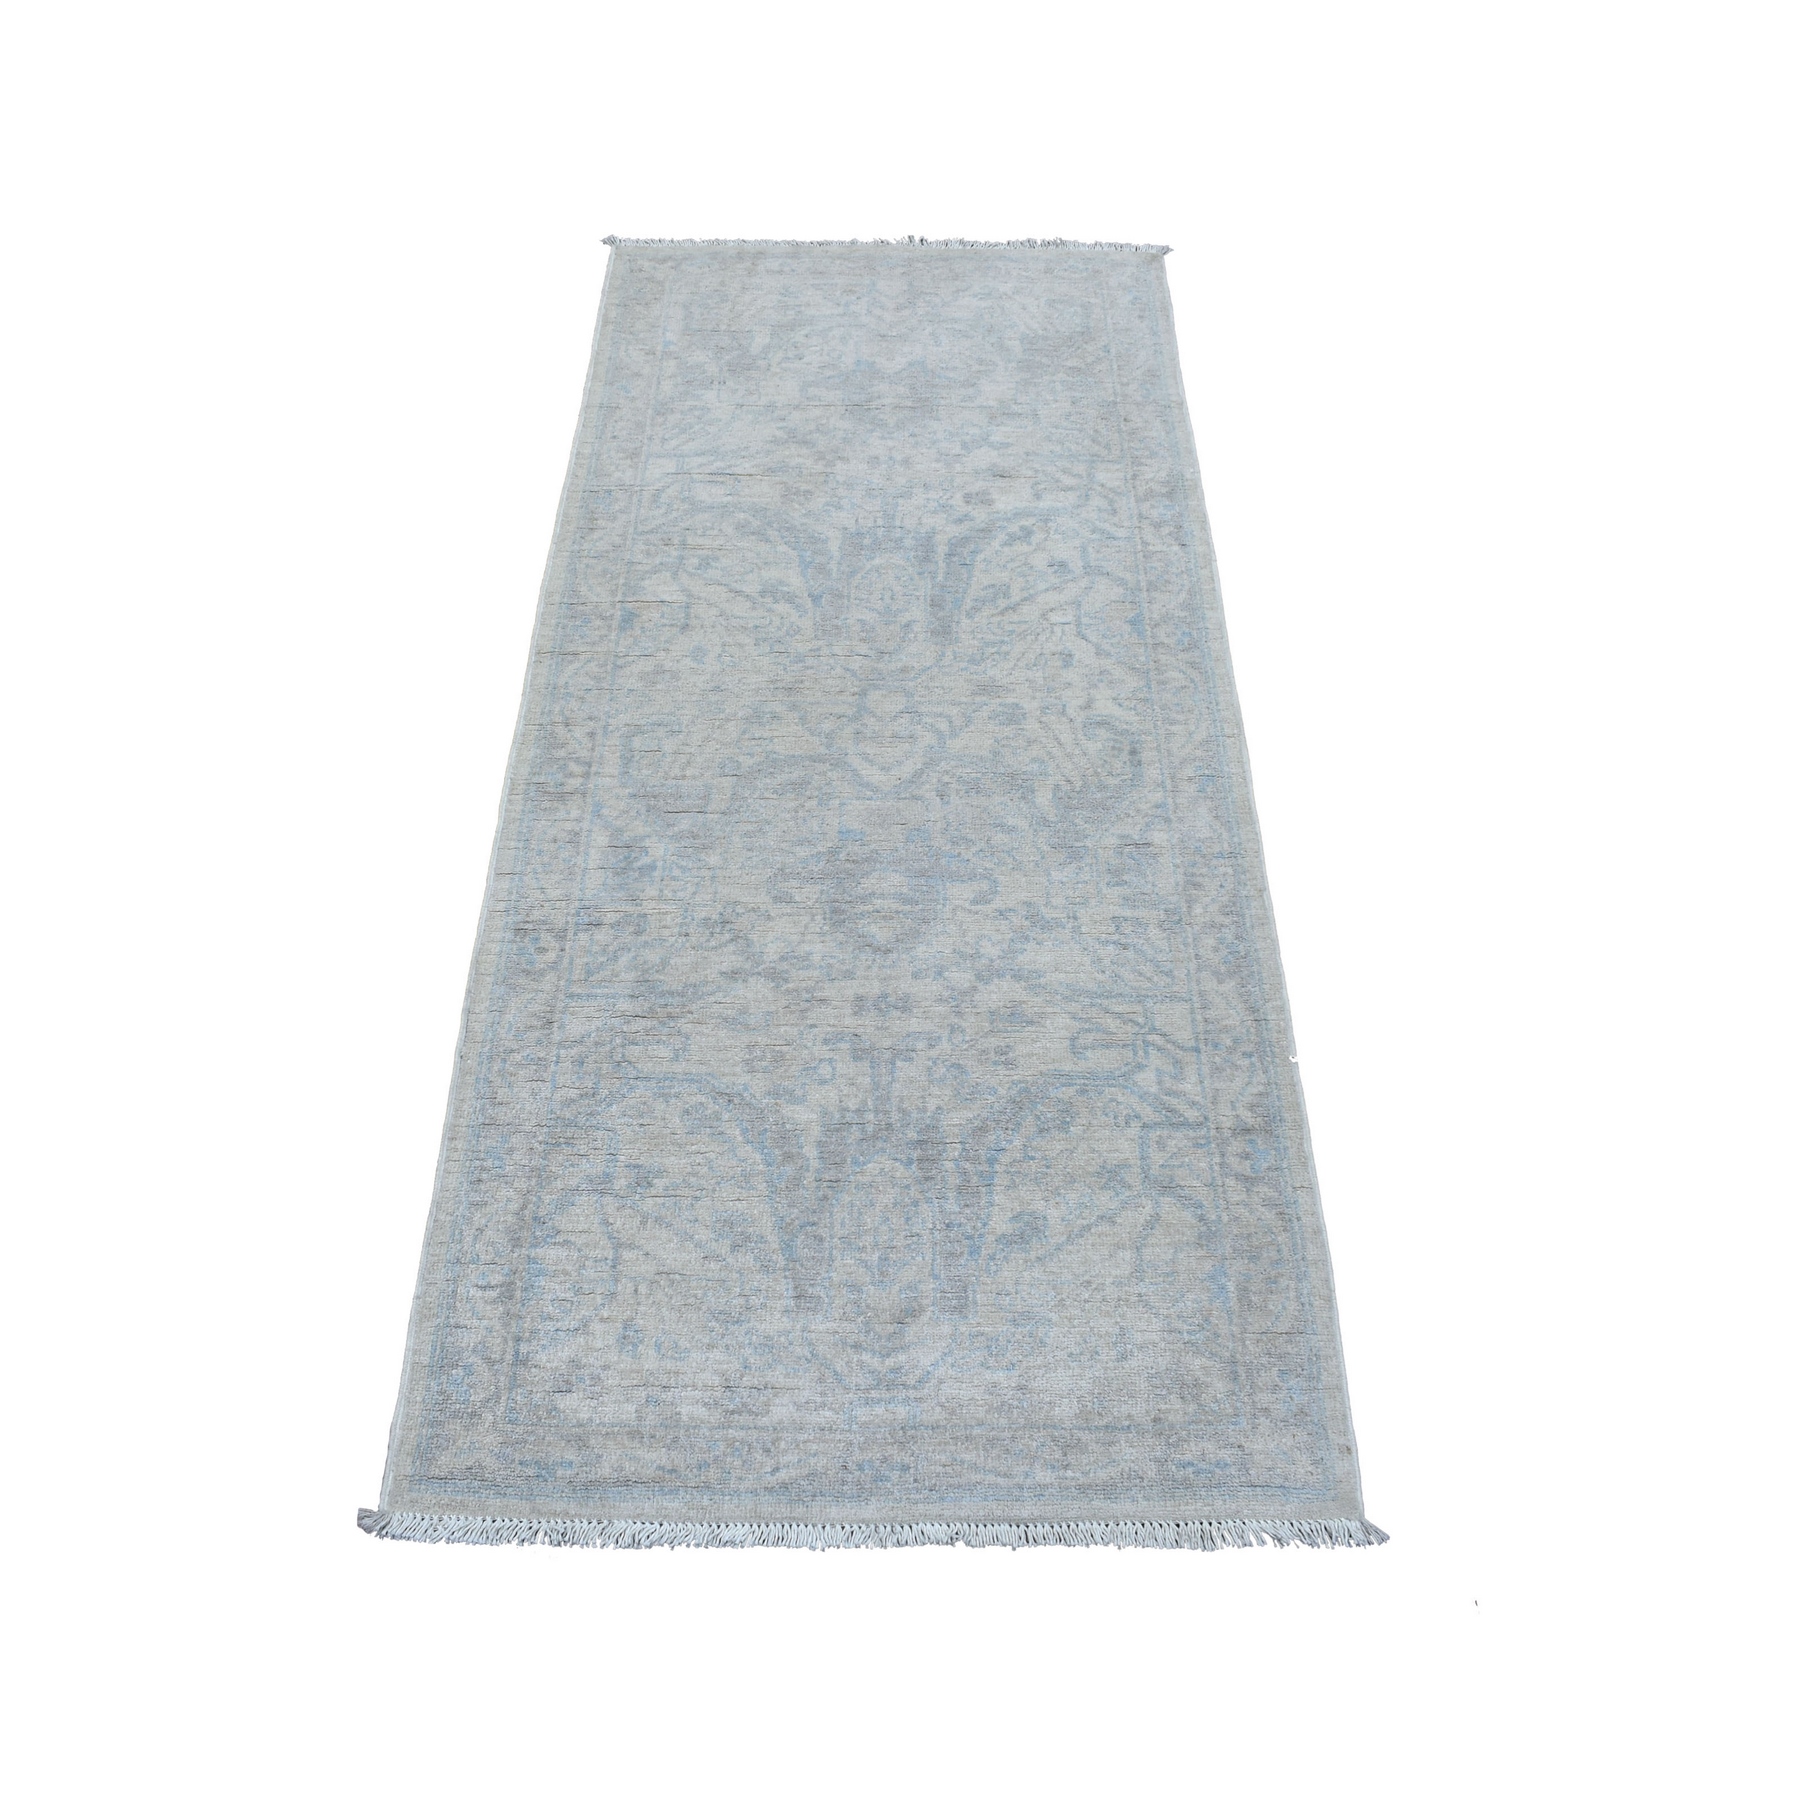 2'6"x5'7" Organic Wool White Wash Peshawar with Obscure Design Hand Woven Oriental Runner Rug 